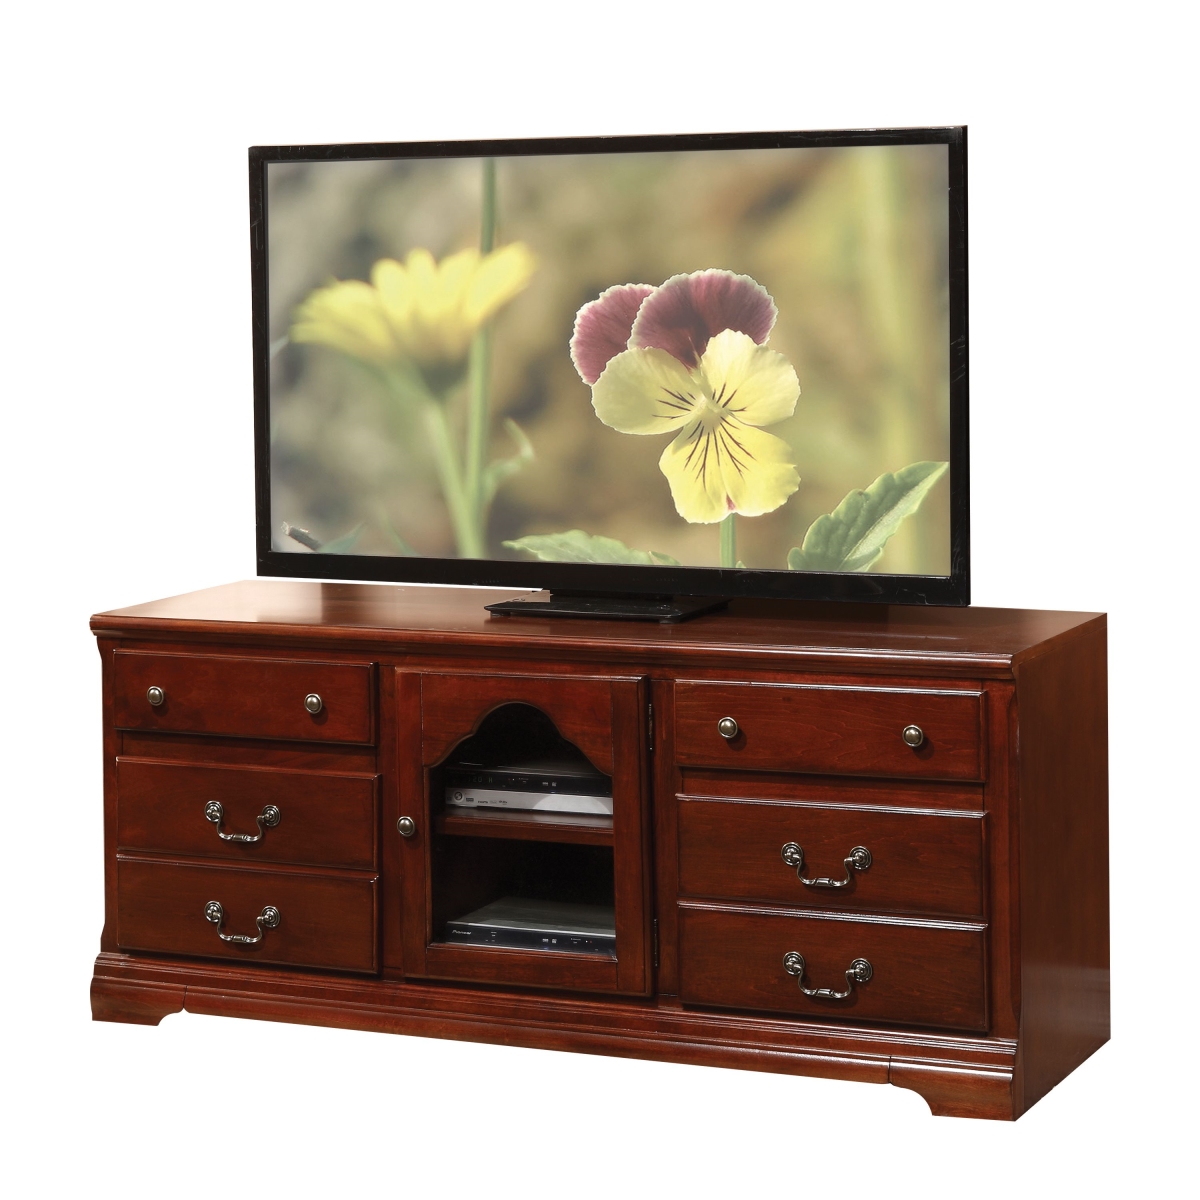 HomeRoots 347481 19 x 58 x 26 in. Cherry Wood Glass TV Stand